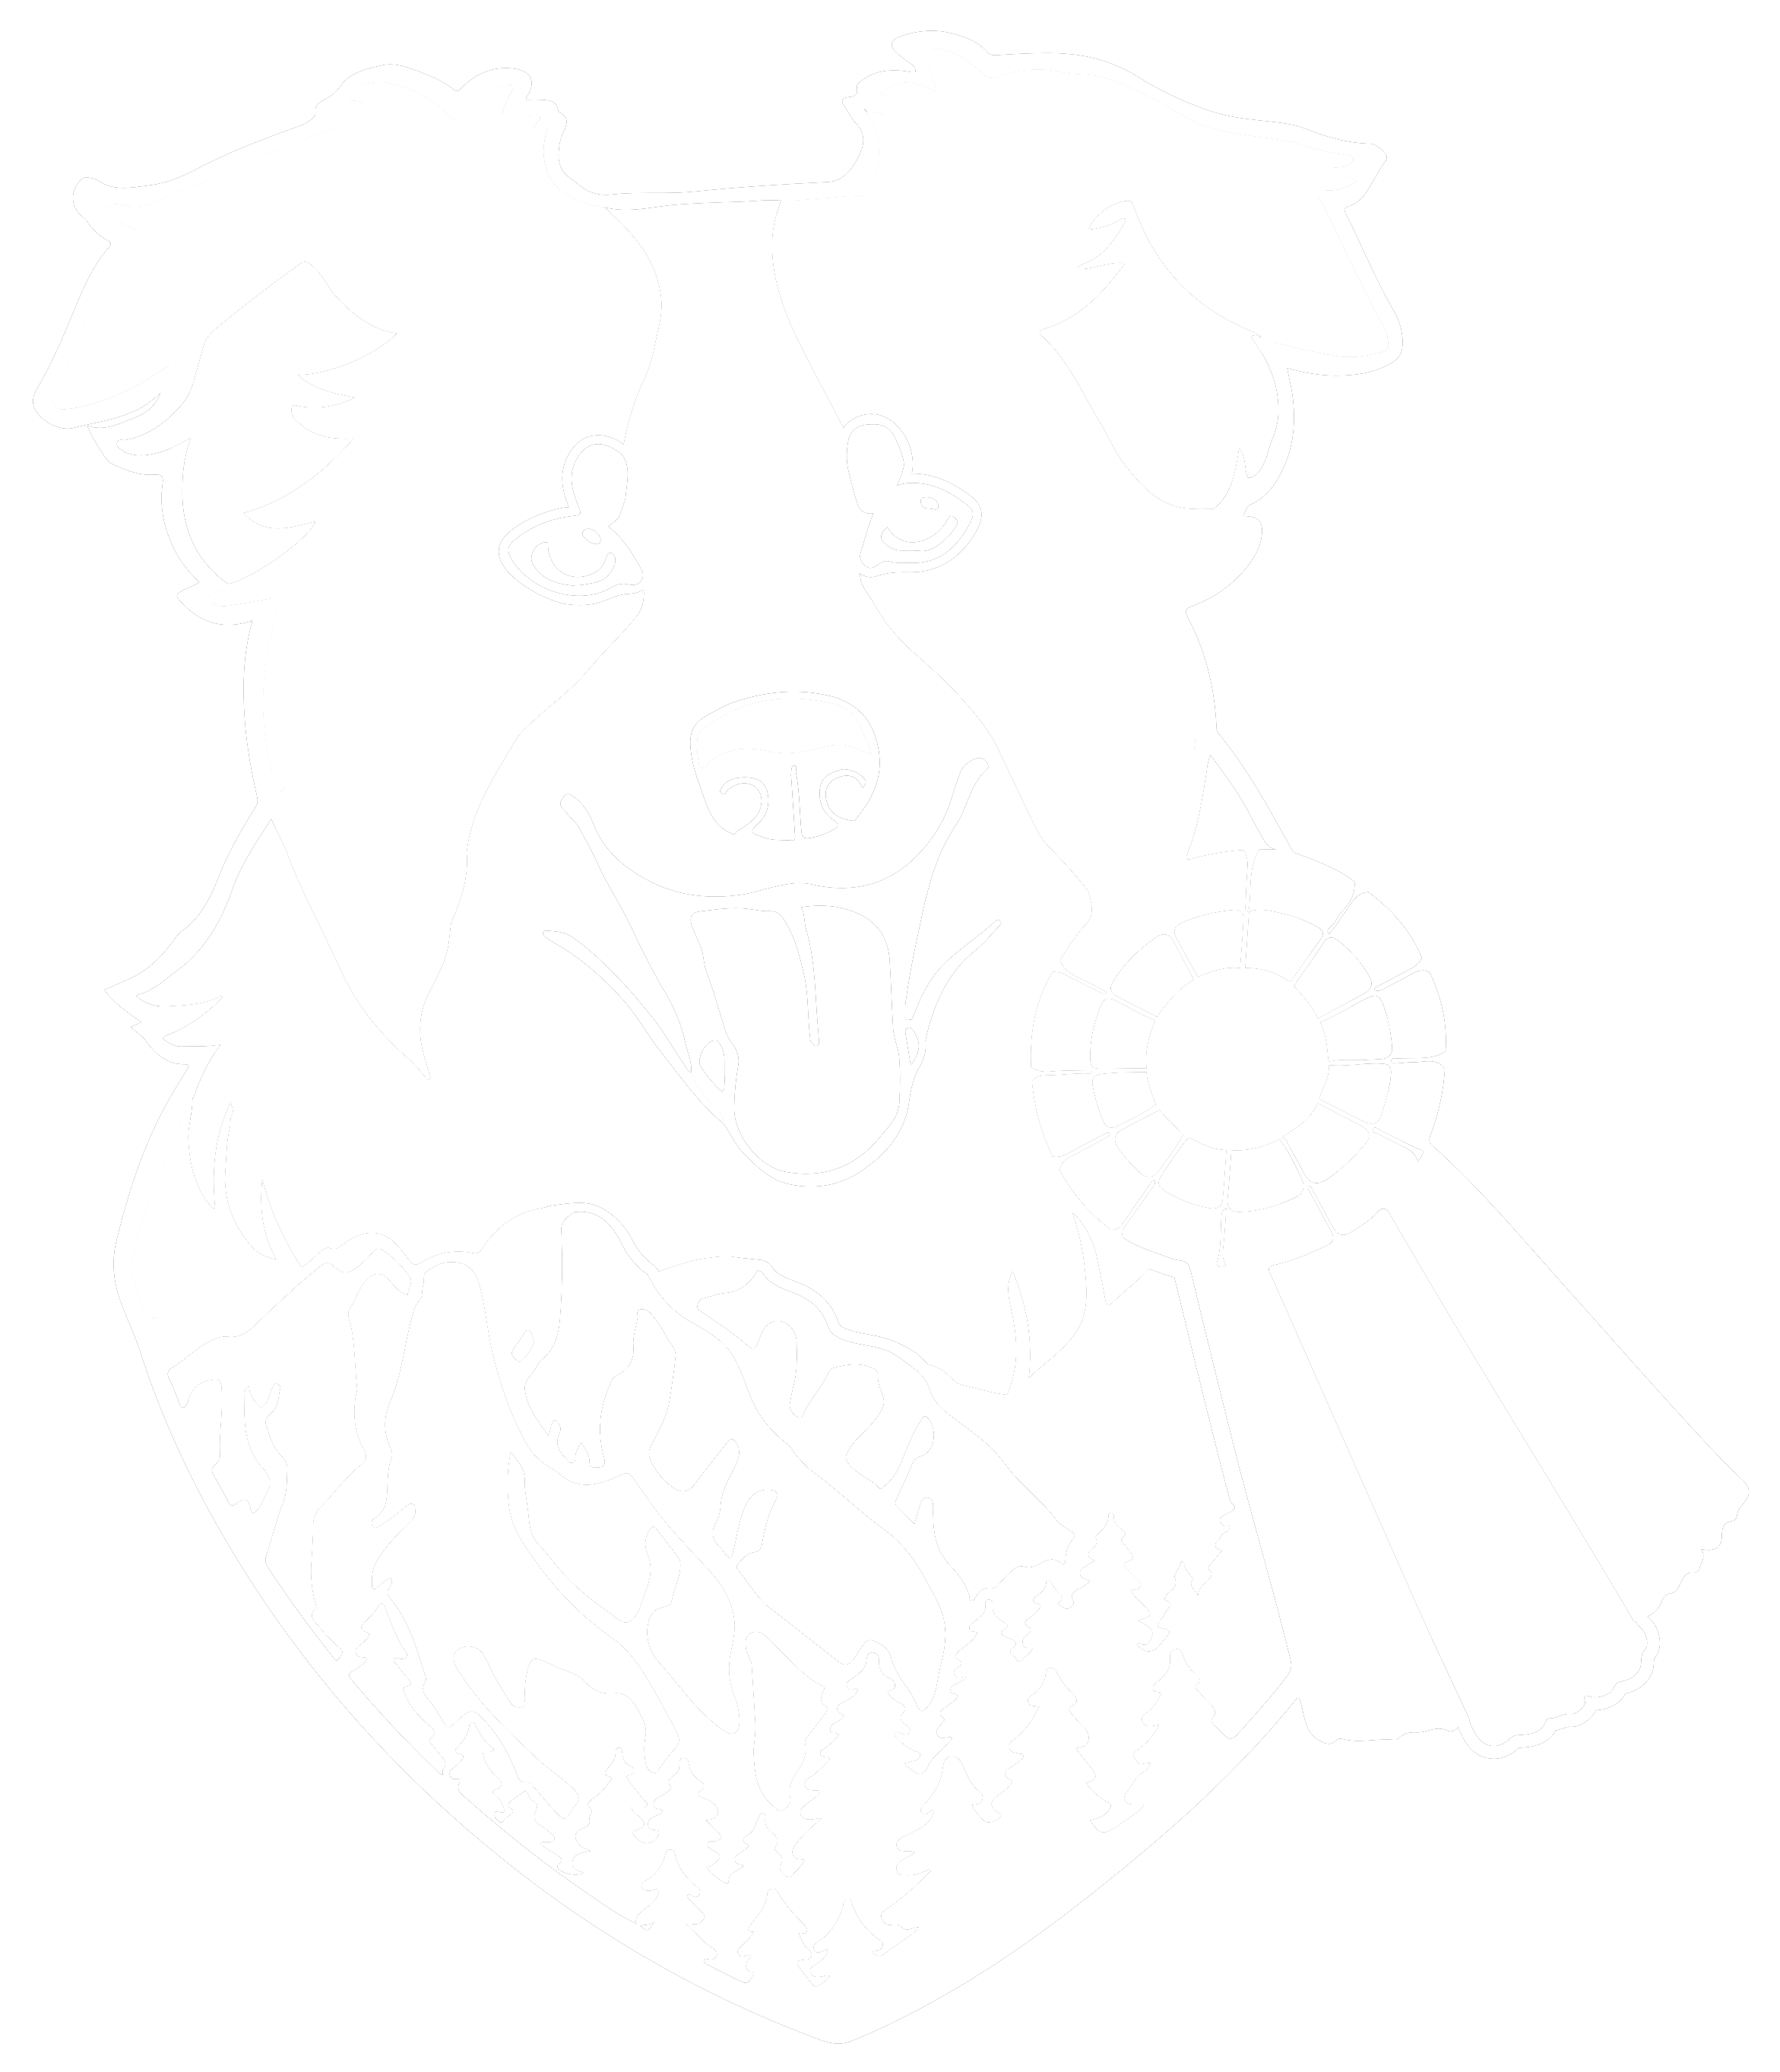 White logo for the Snoqualmie Valley Family Dog Show